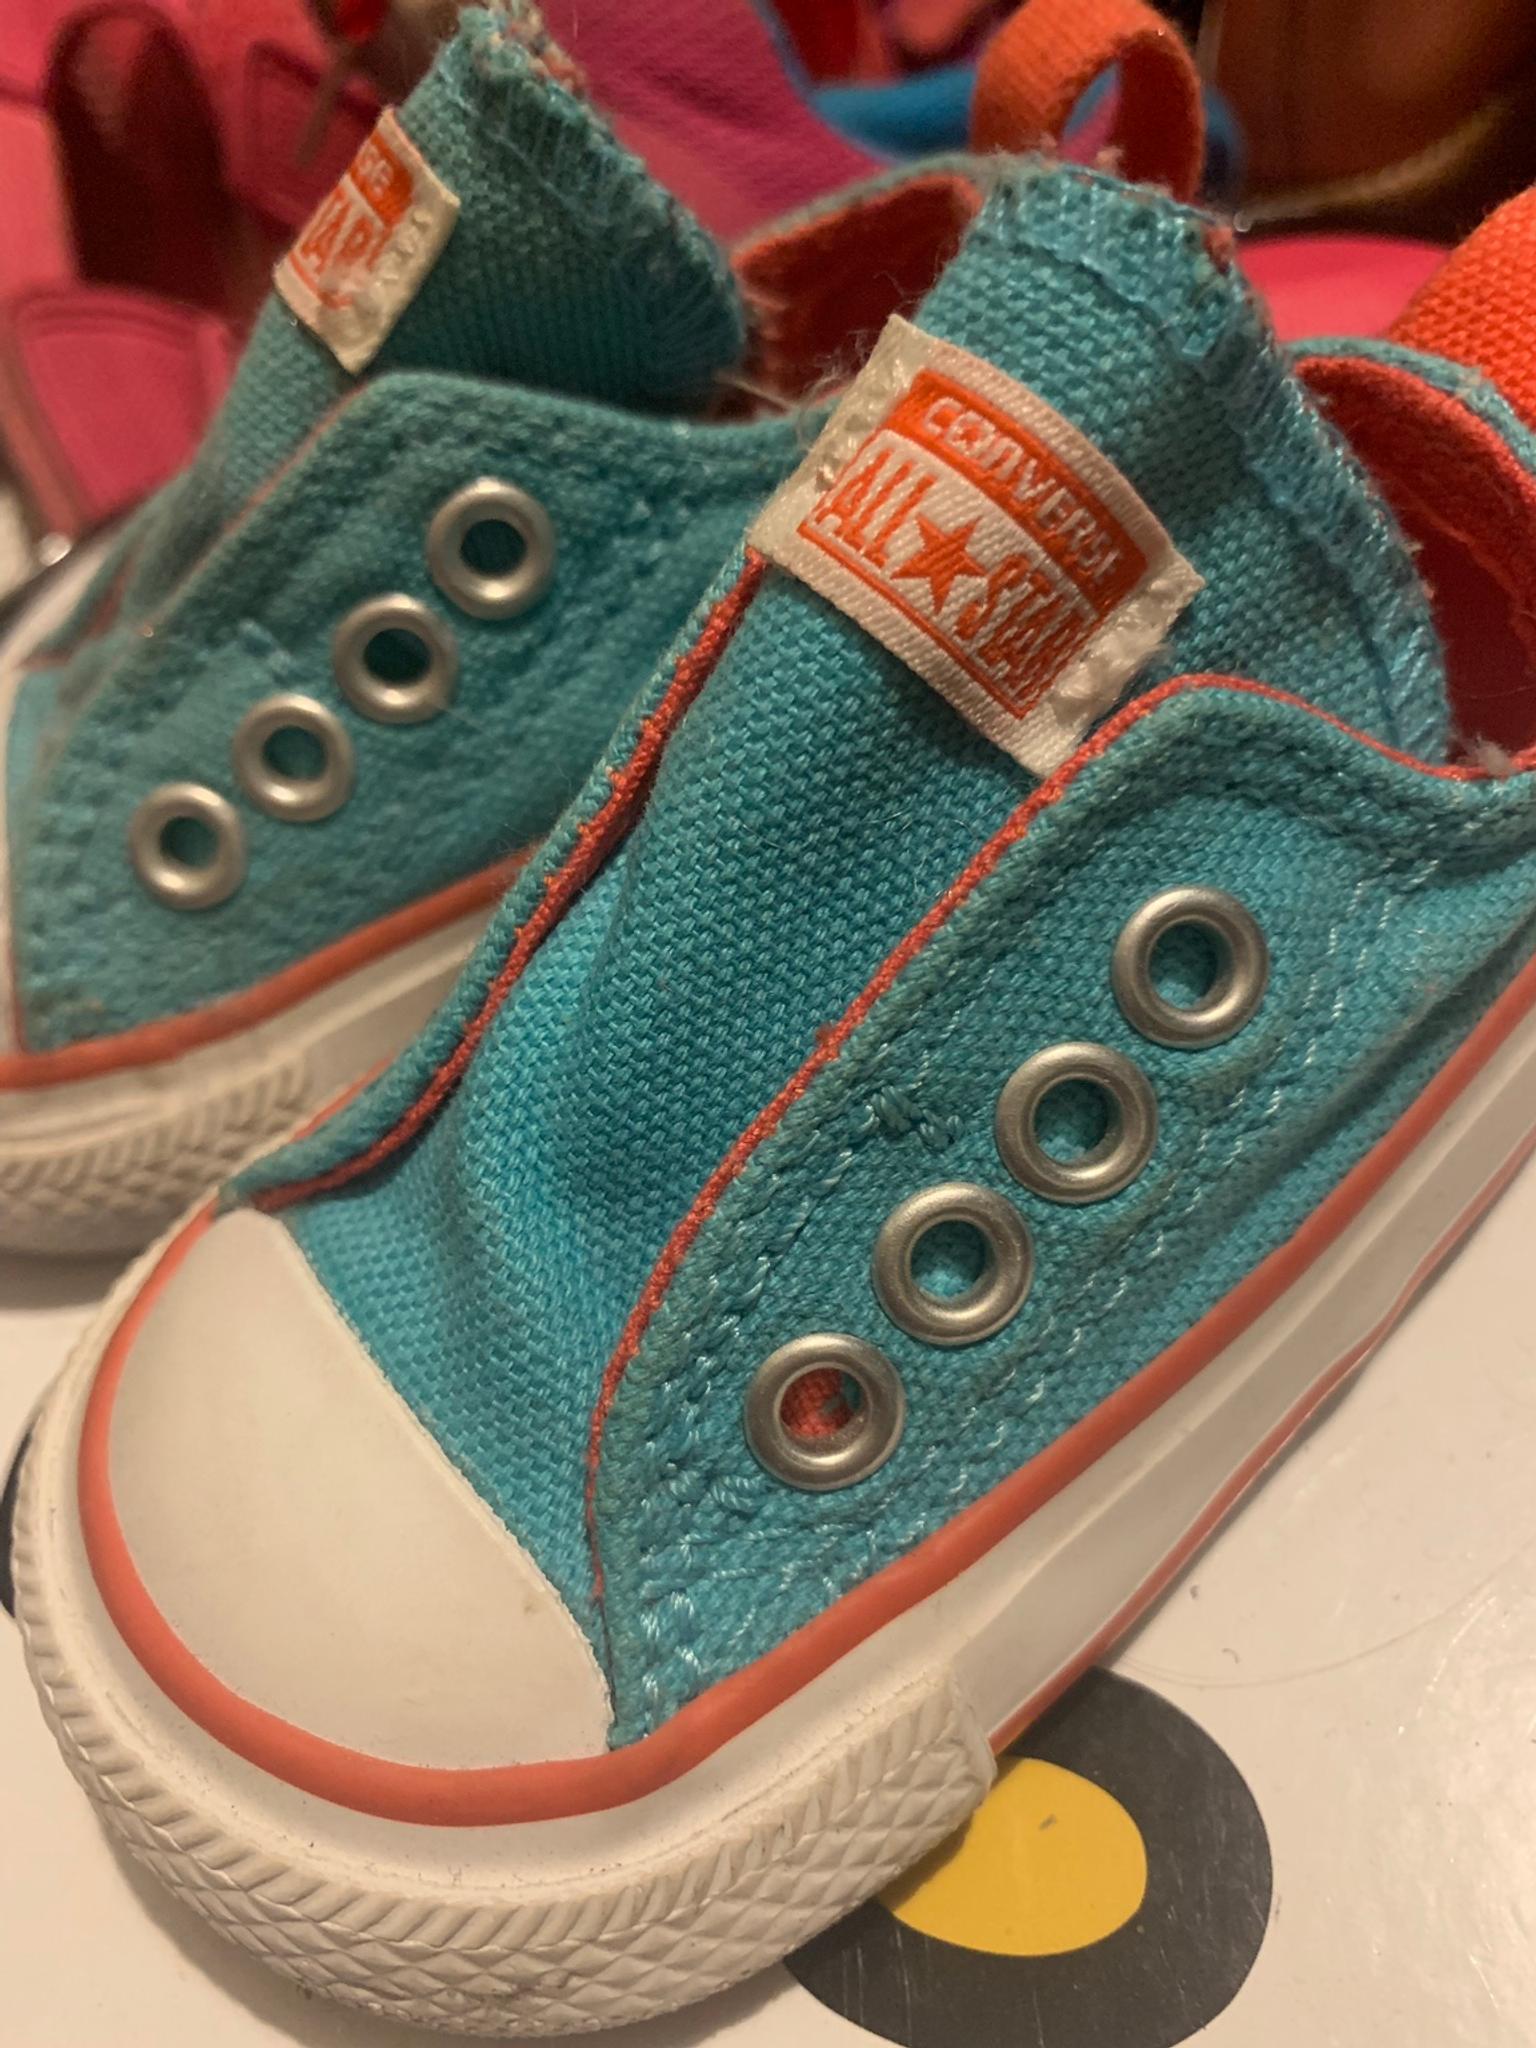 baby converse with velcro